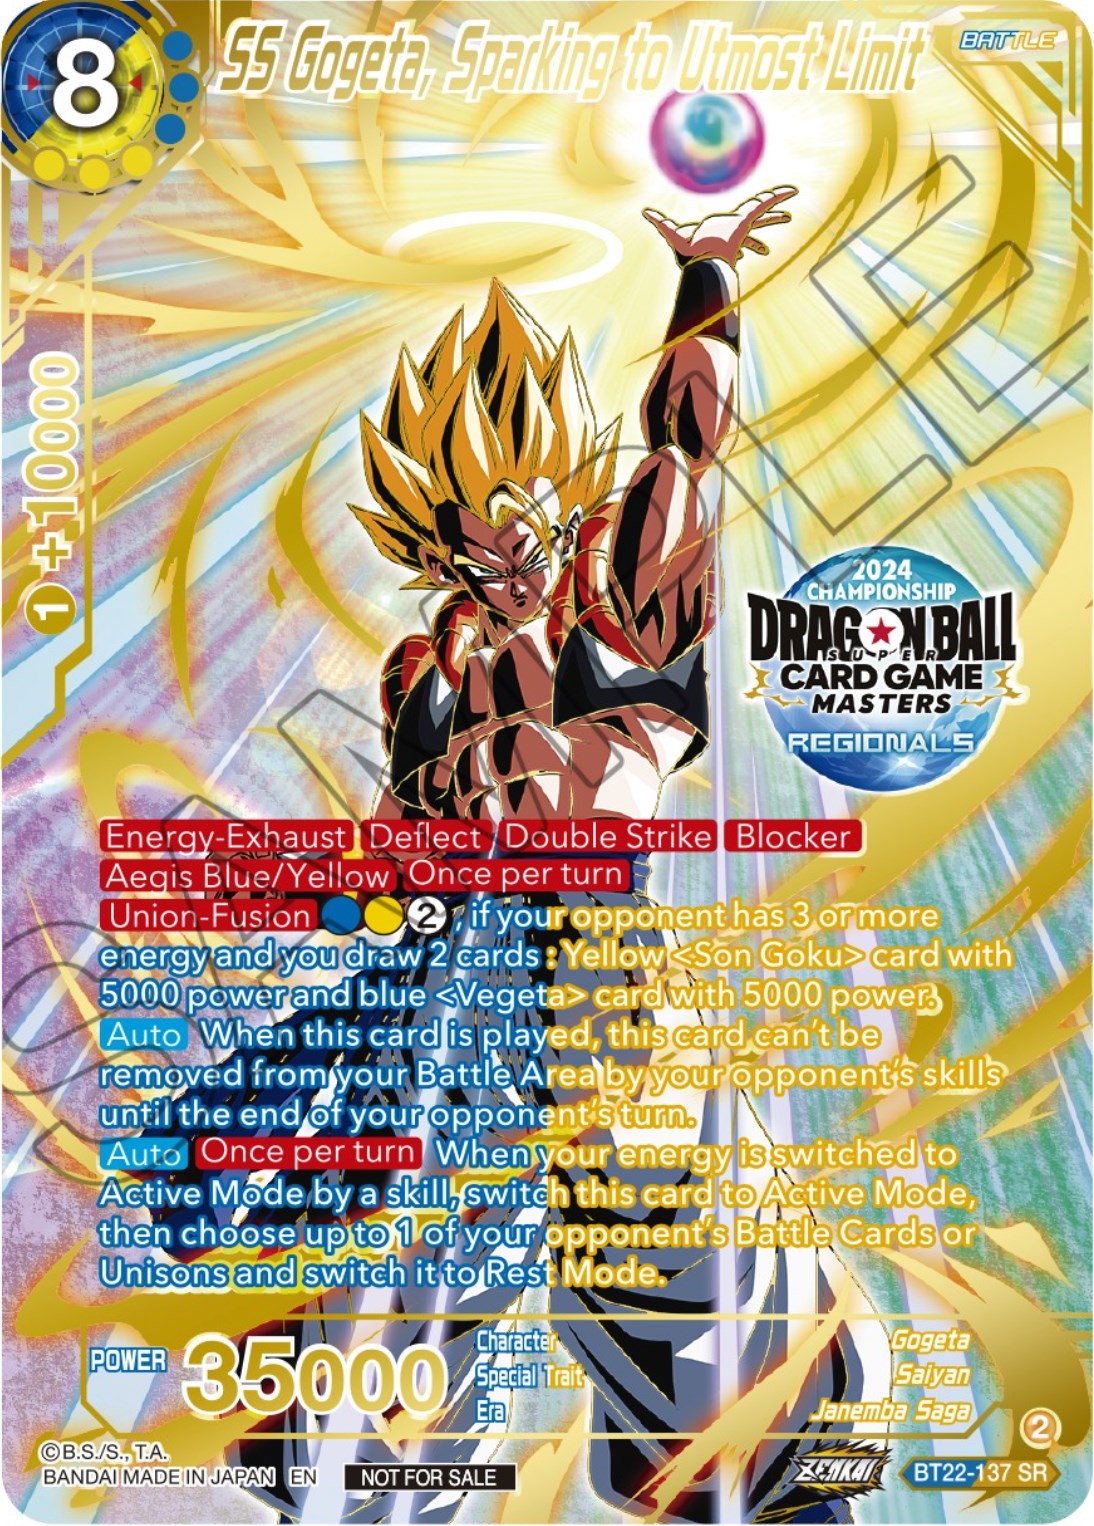 SS Gogeta, Sparking to Utmost Limit (2024 Championship Regionals Top 16) (BT22-137) [Tournament Promotion Cards] | Amazing Games TCG